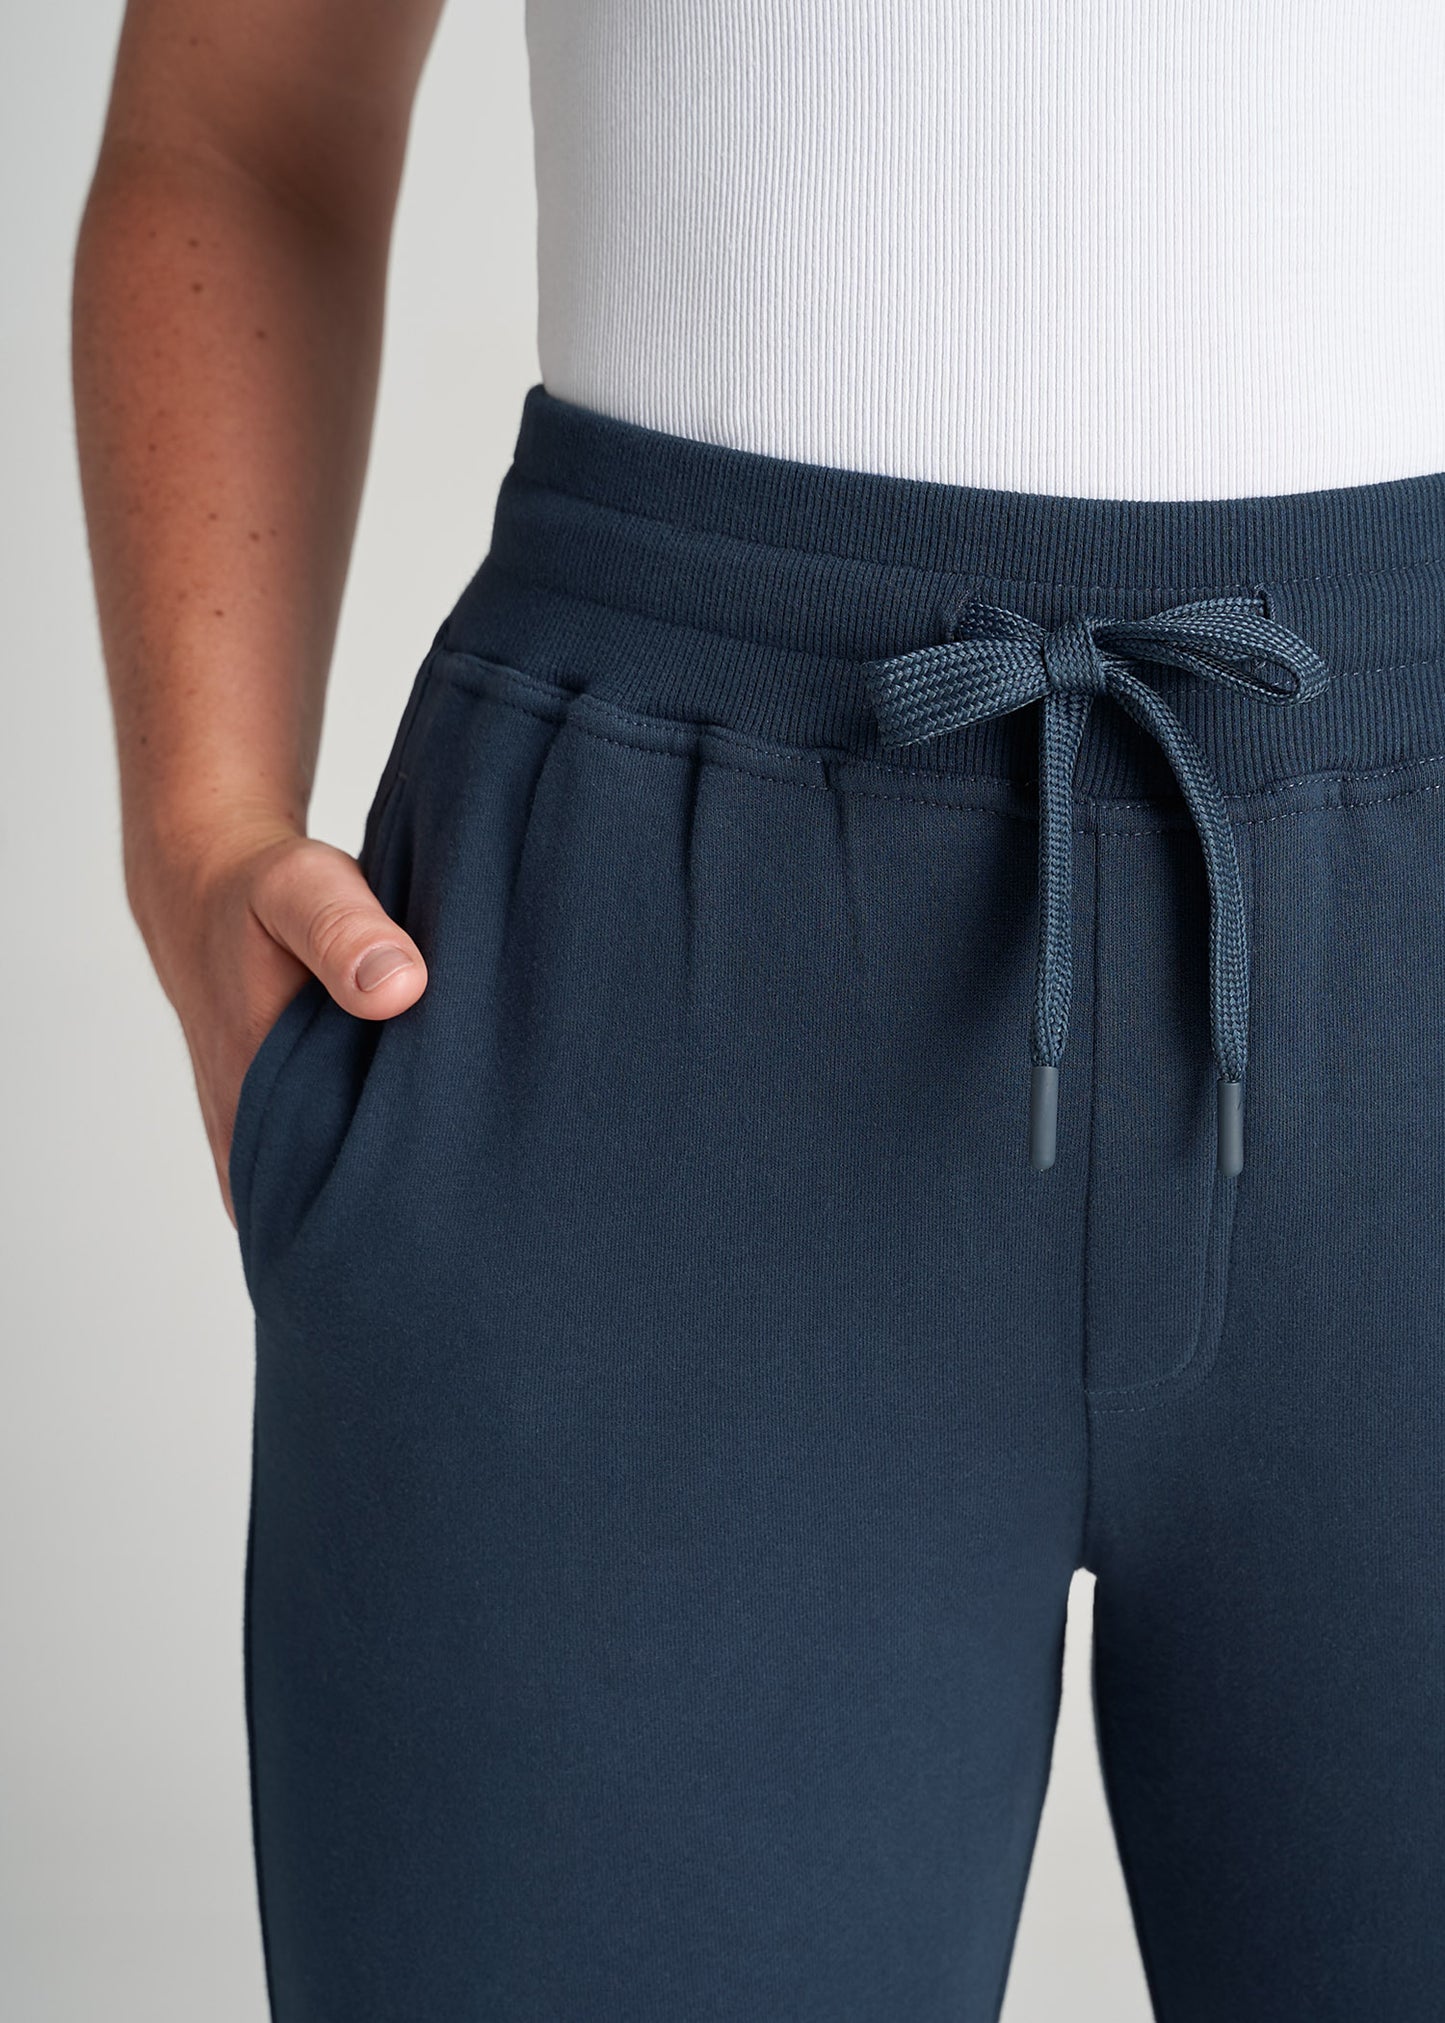 American-Tall-Women-Tall-FrenchTerry-Jogger-BrightNavy-detail